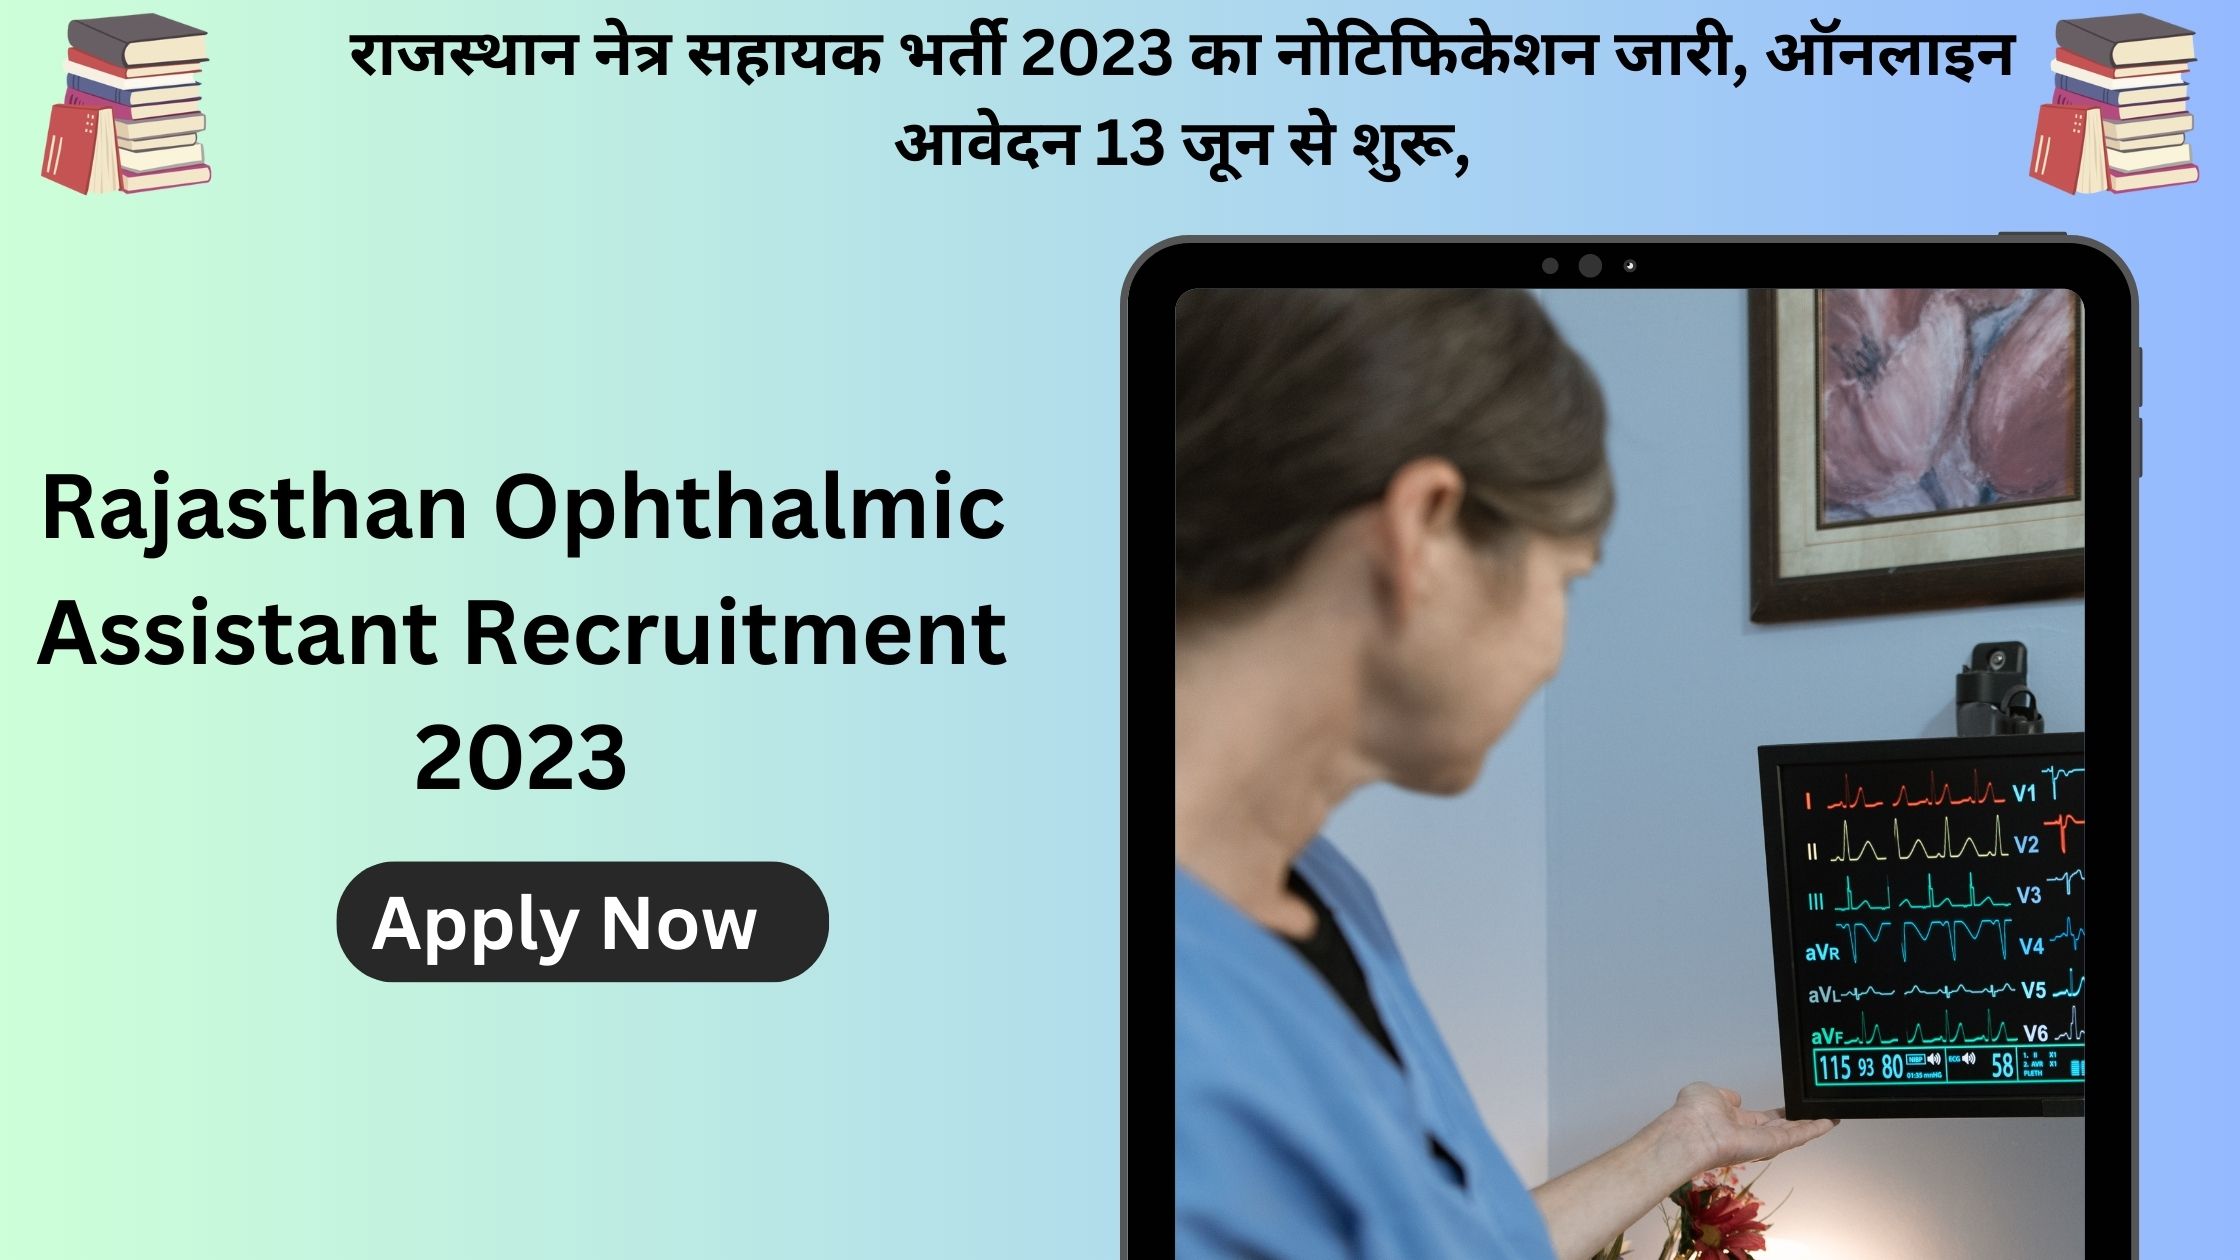 Rajasthan Ophthalmic Assistant Recruitment 2023 Apply Now